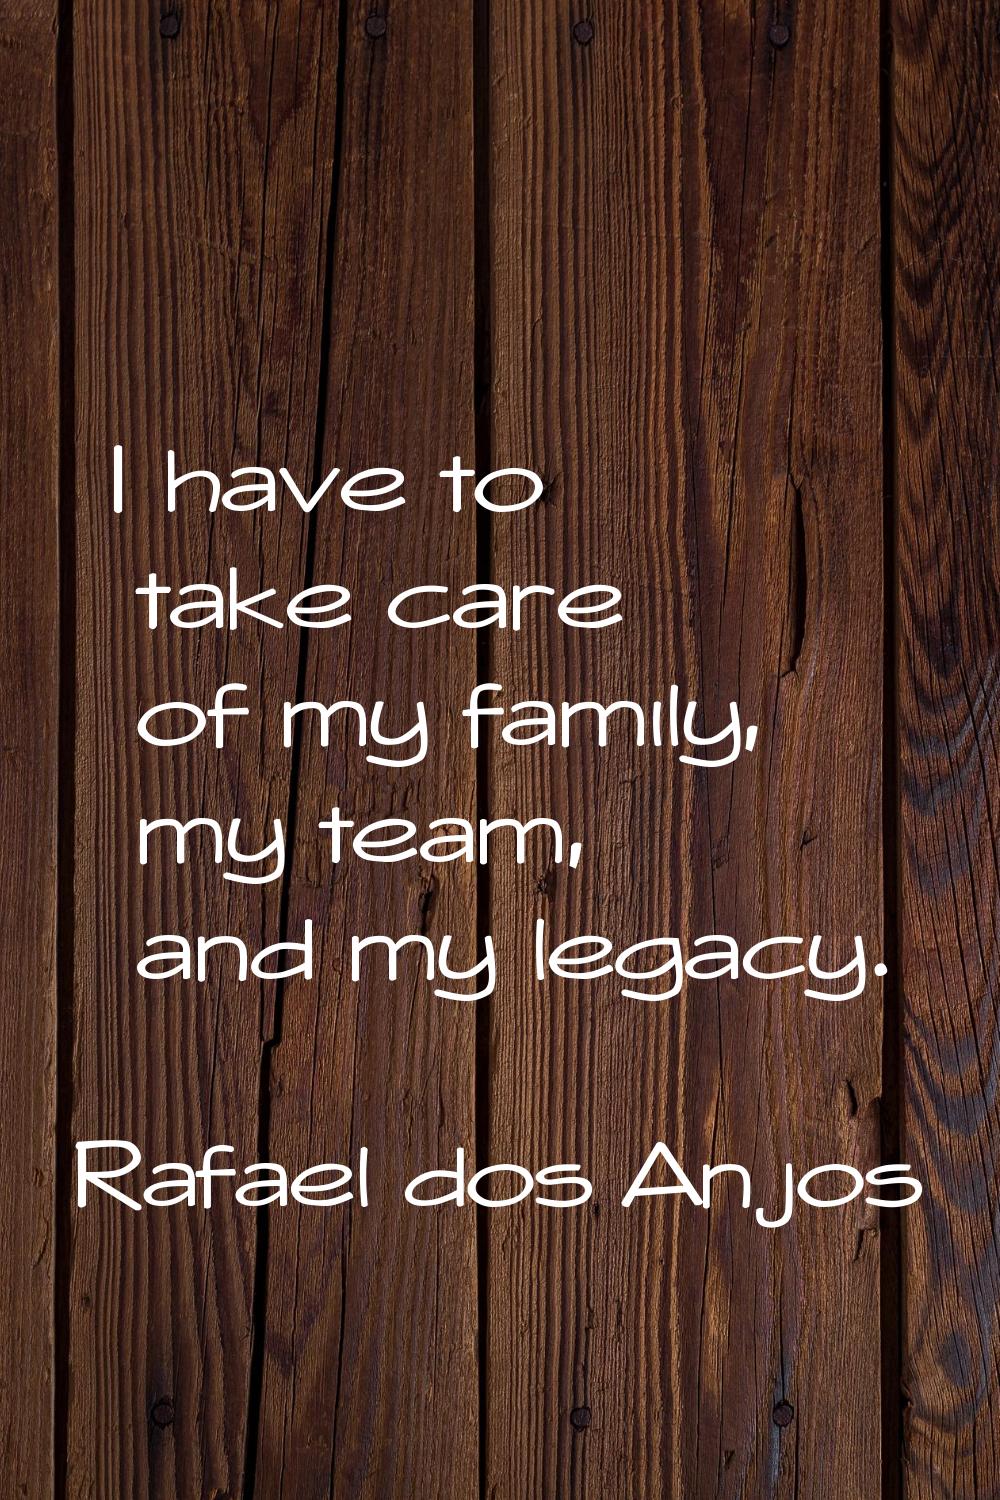 I have to take care of my family, my team, and my legacy.